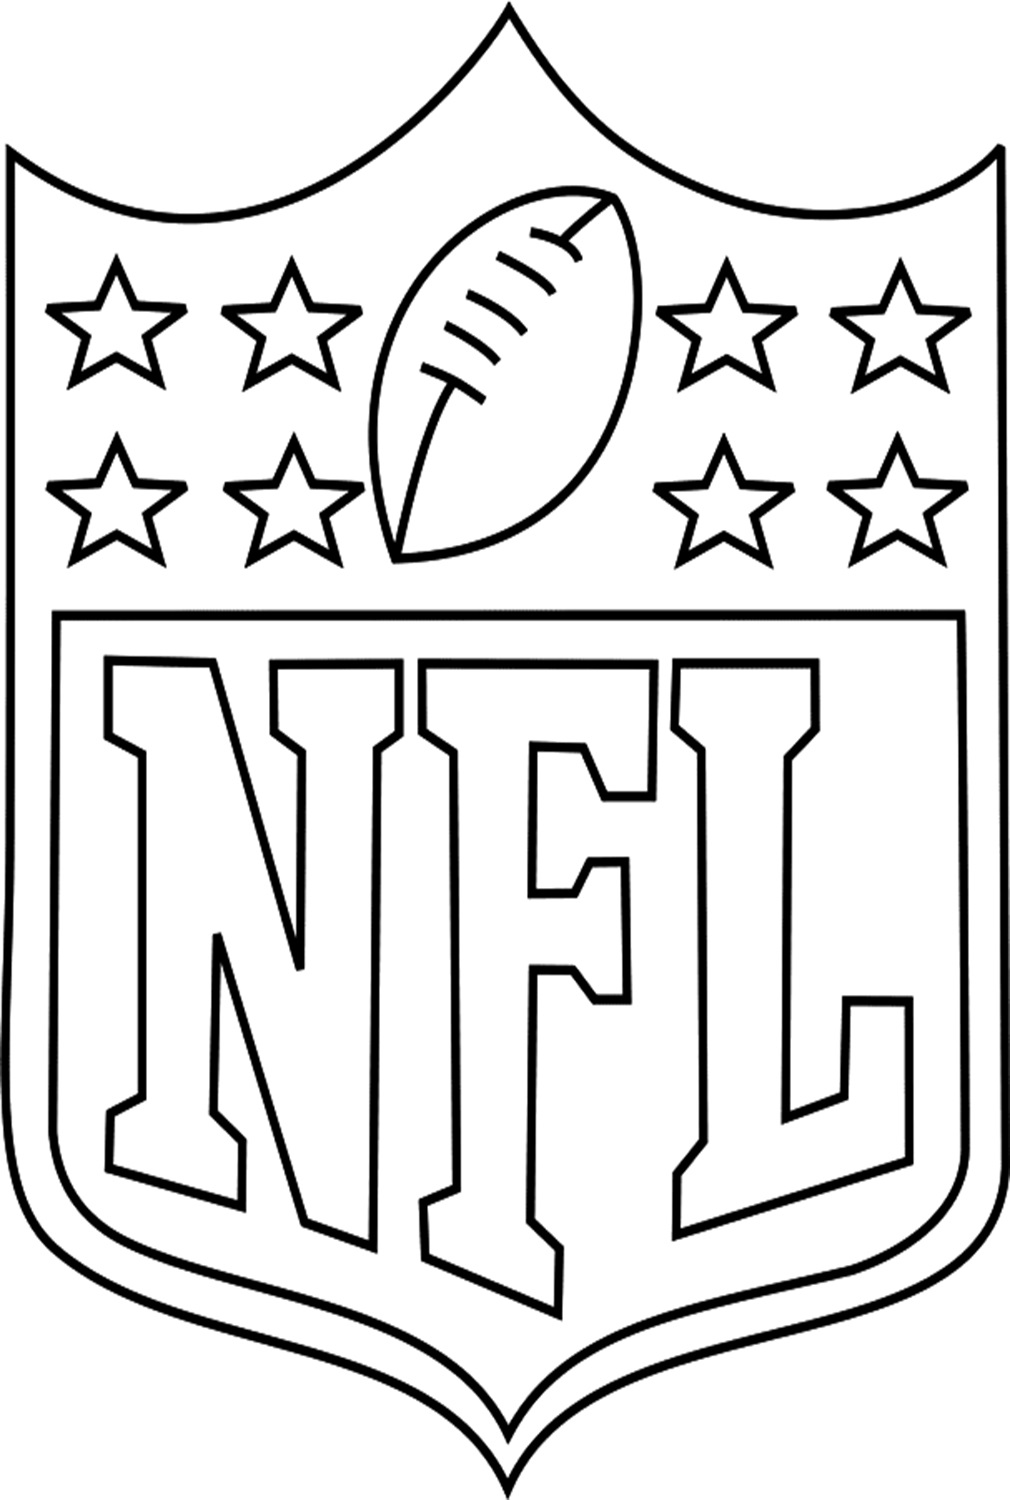 NFL Logo Coloring Page - Free Printable Coloring Pages